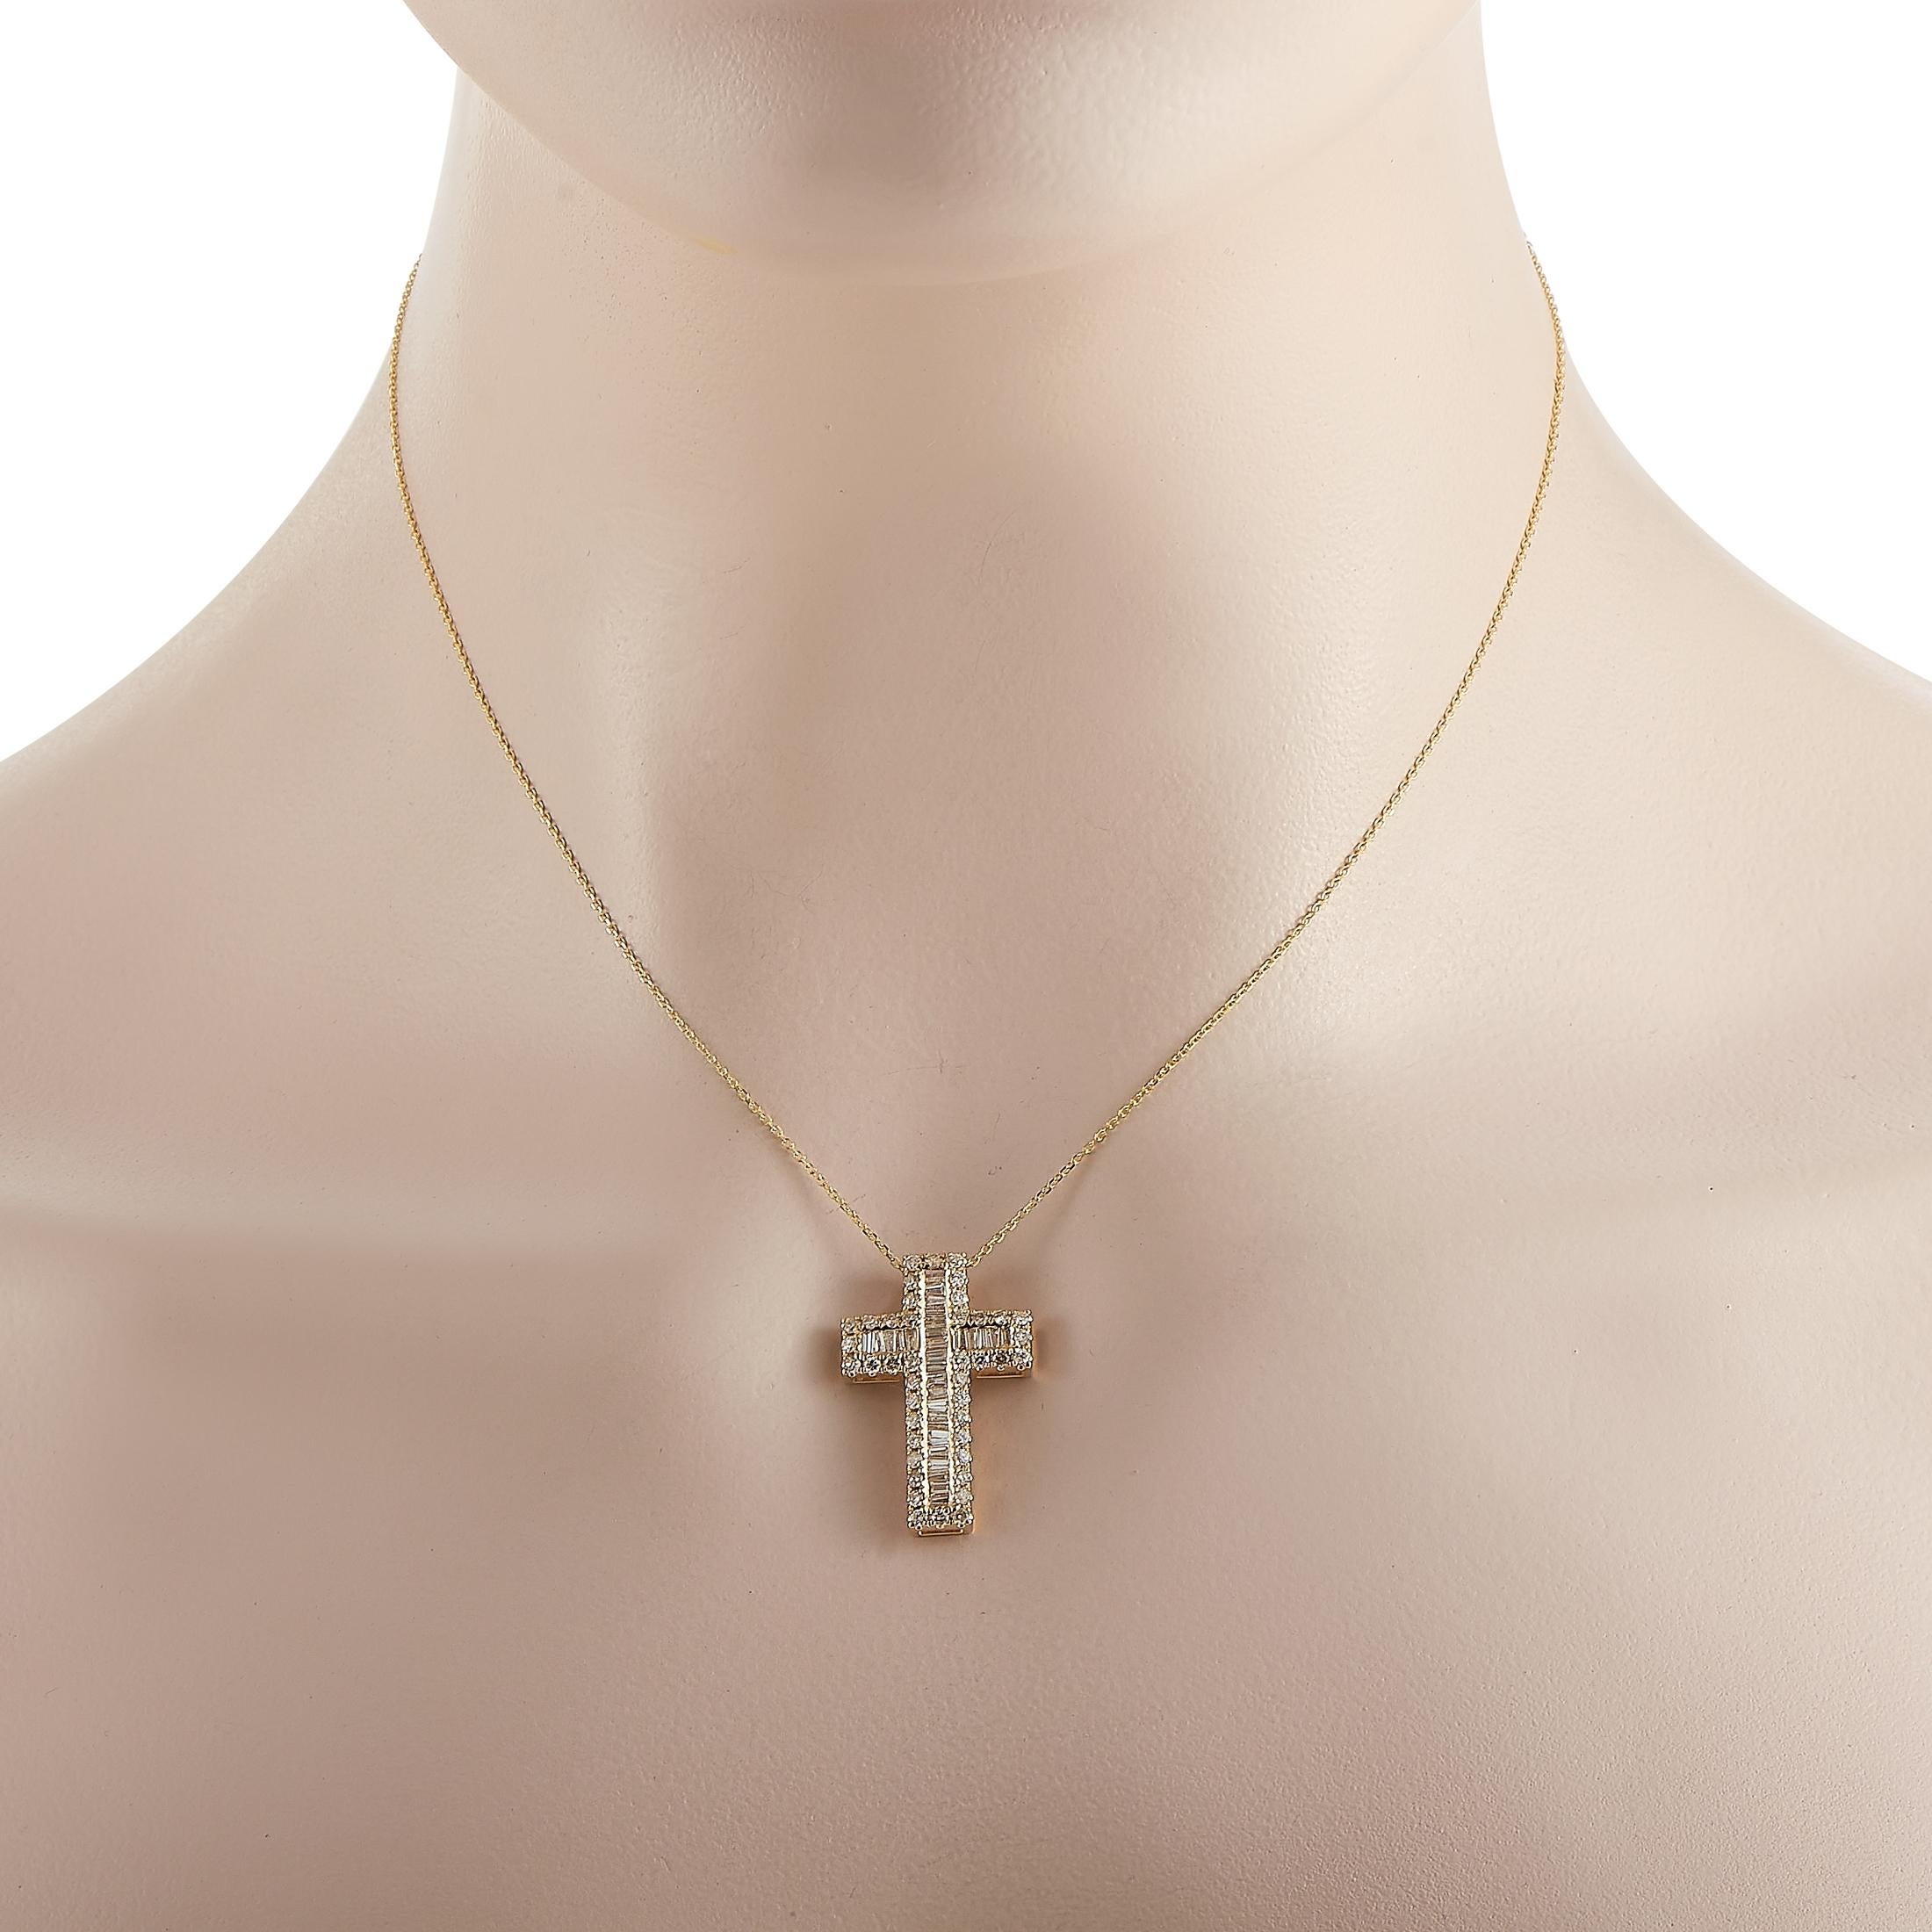 This classic LB Exclusive cross necklace is made with a delicate 14K yellow gold chain and features a matching 14k yellow gold cross pendant. The pendant is set with 0.24 carats of baguette and round-cut diamonds over the face of the cross. The